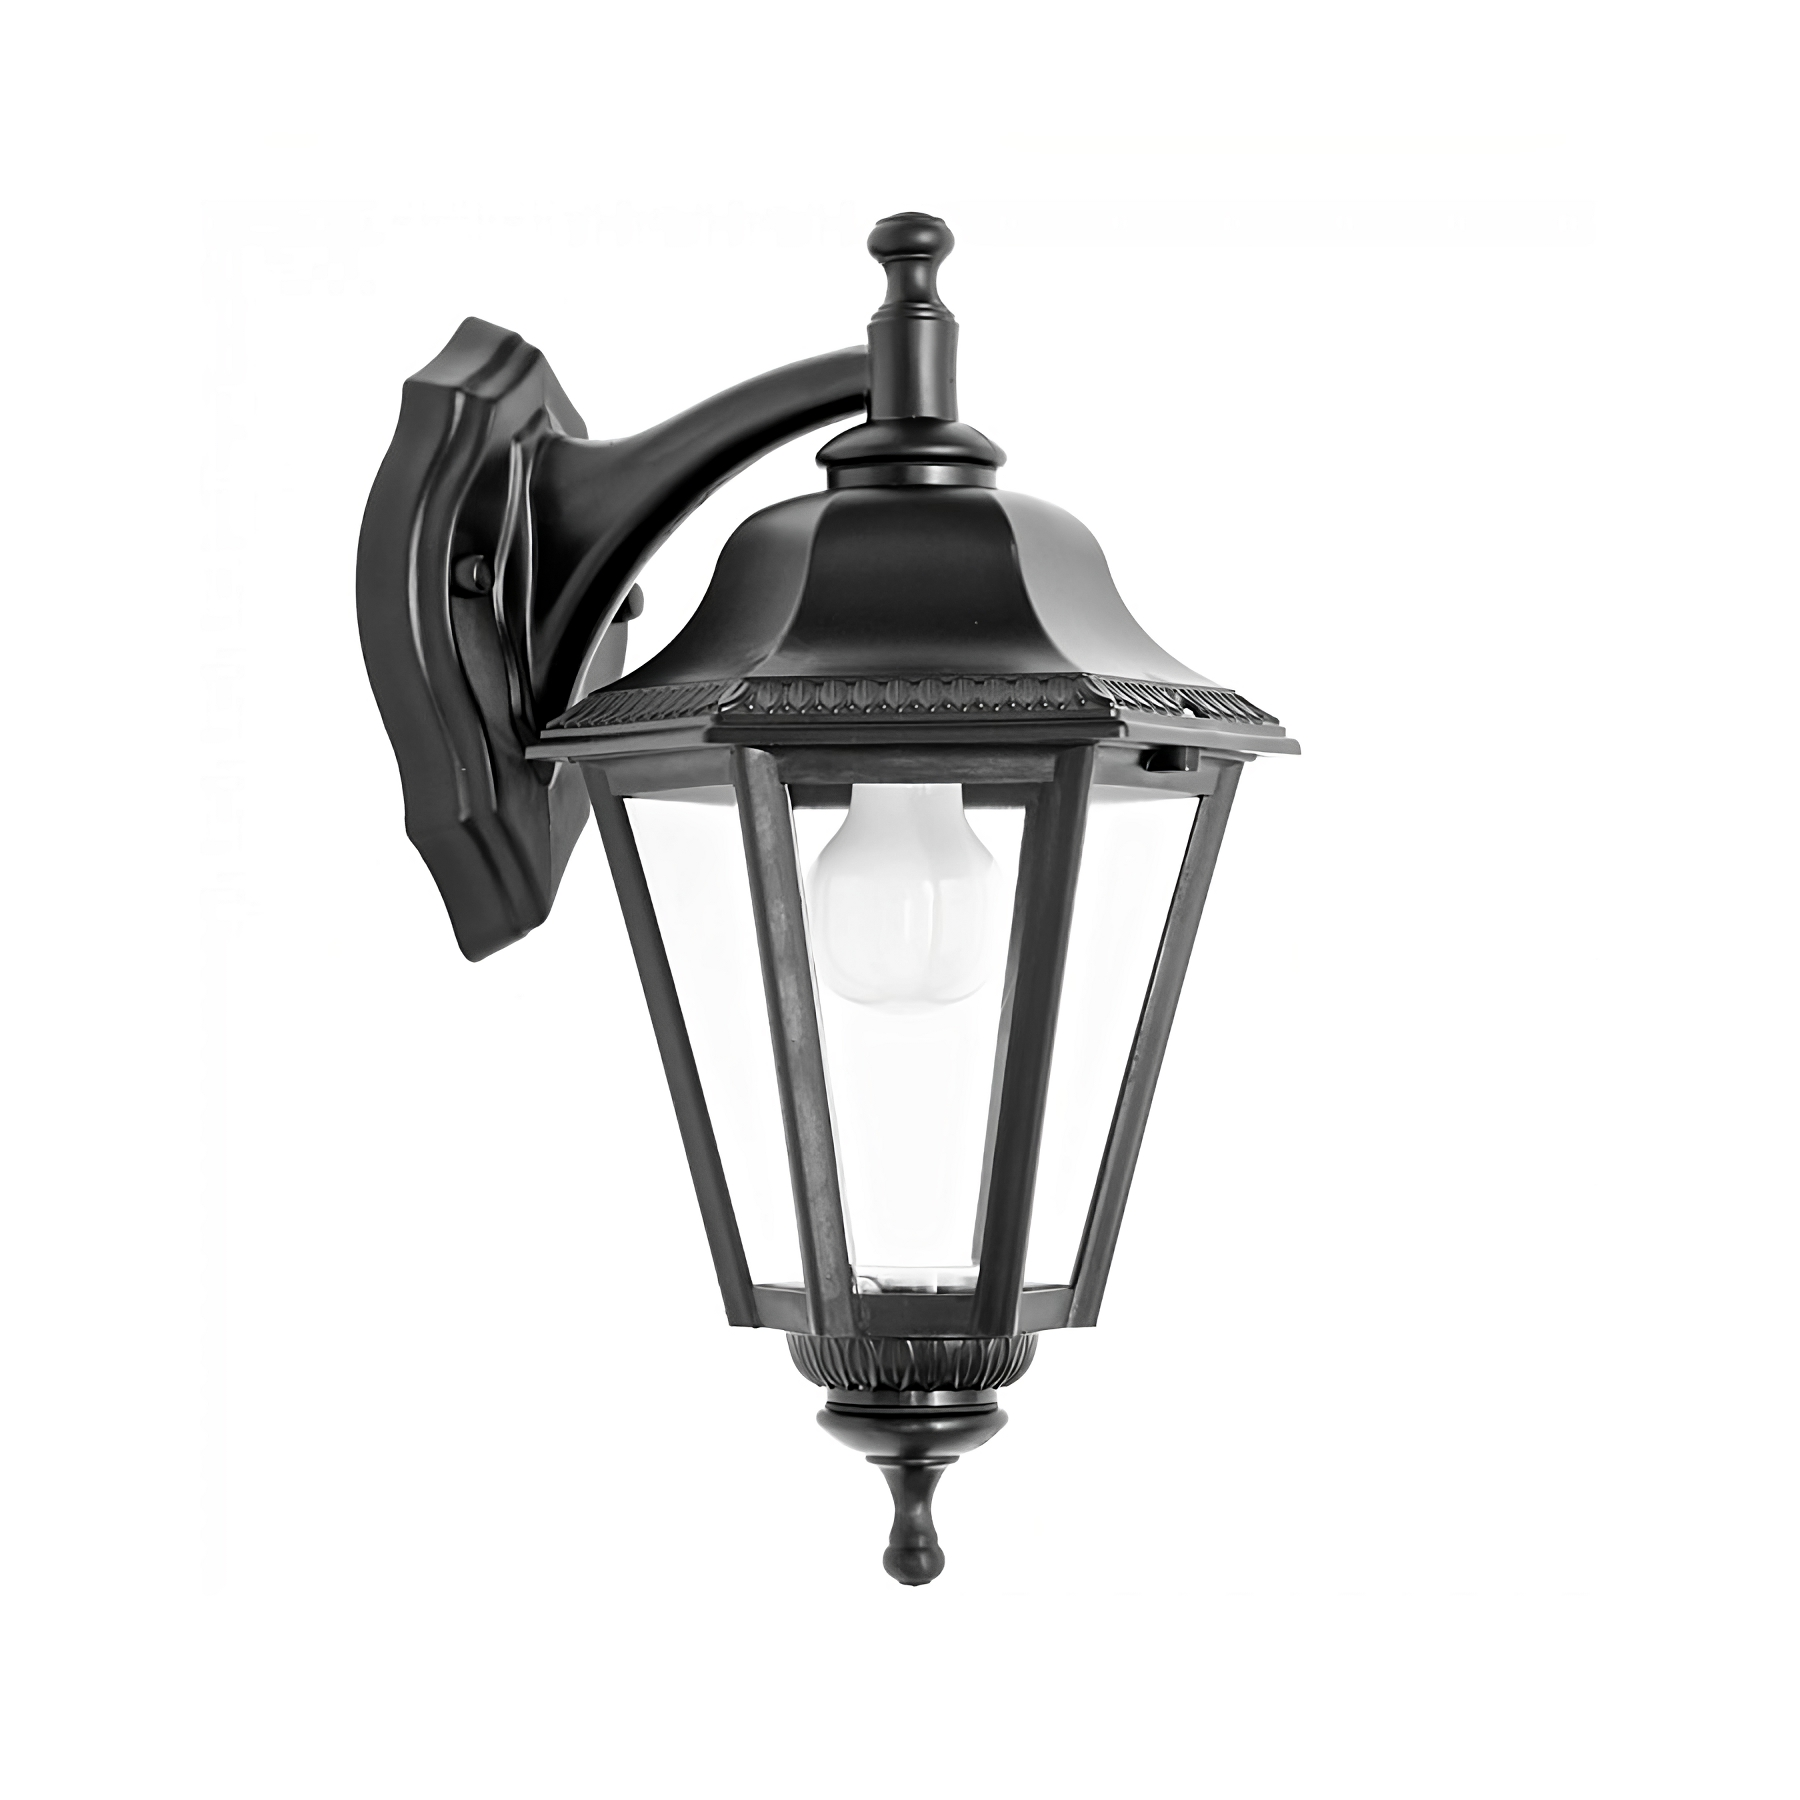 Product image of Castra Black Resin Exterior Coach Lantern